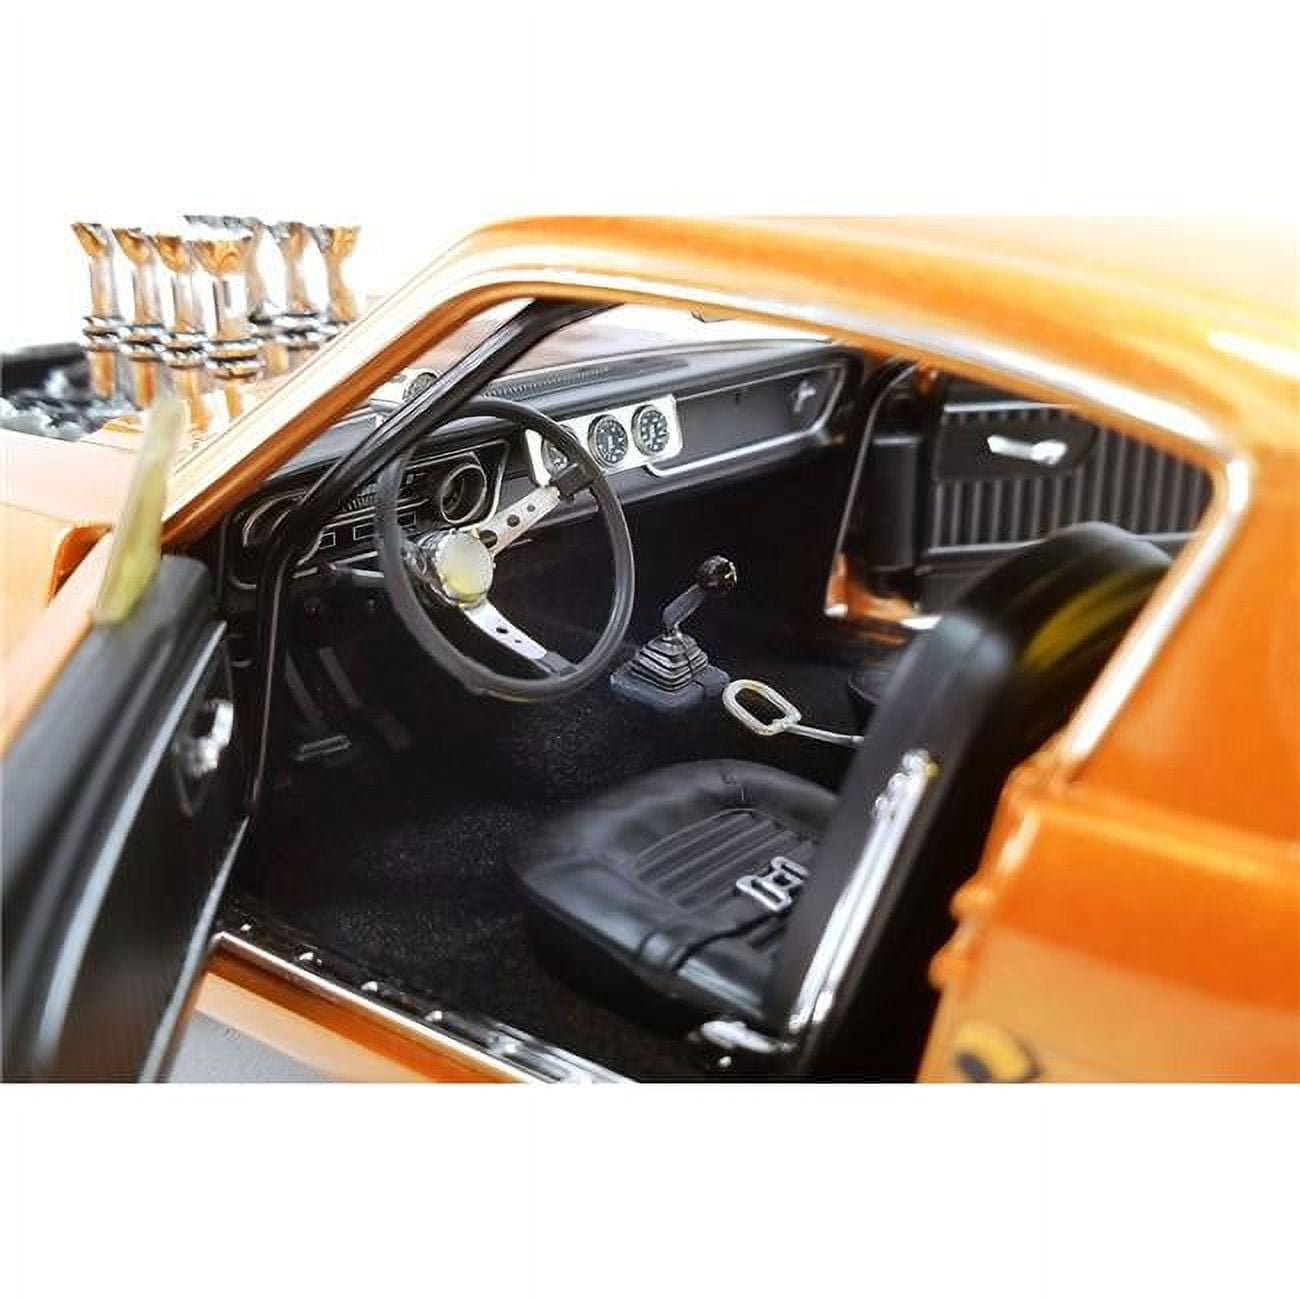 Picture of Acme A1801860 1-18 Scale 1965 Ford Mustang A-FX Orange Metallic Rat Fink Mighty Mustang Limited Edition to Worldwide Diecast Model Car - 1122 Piece